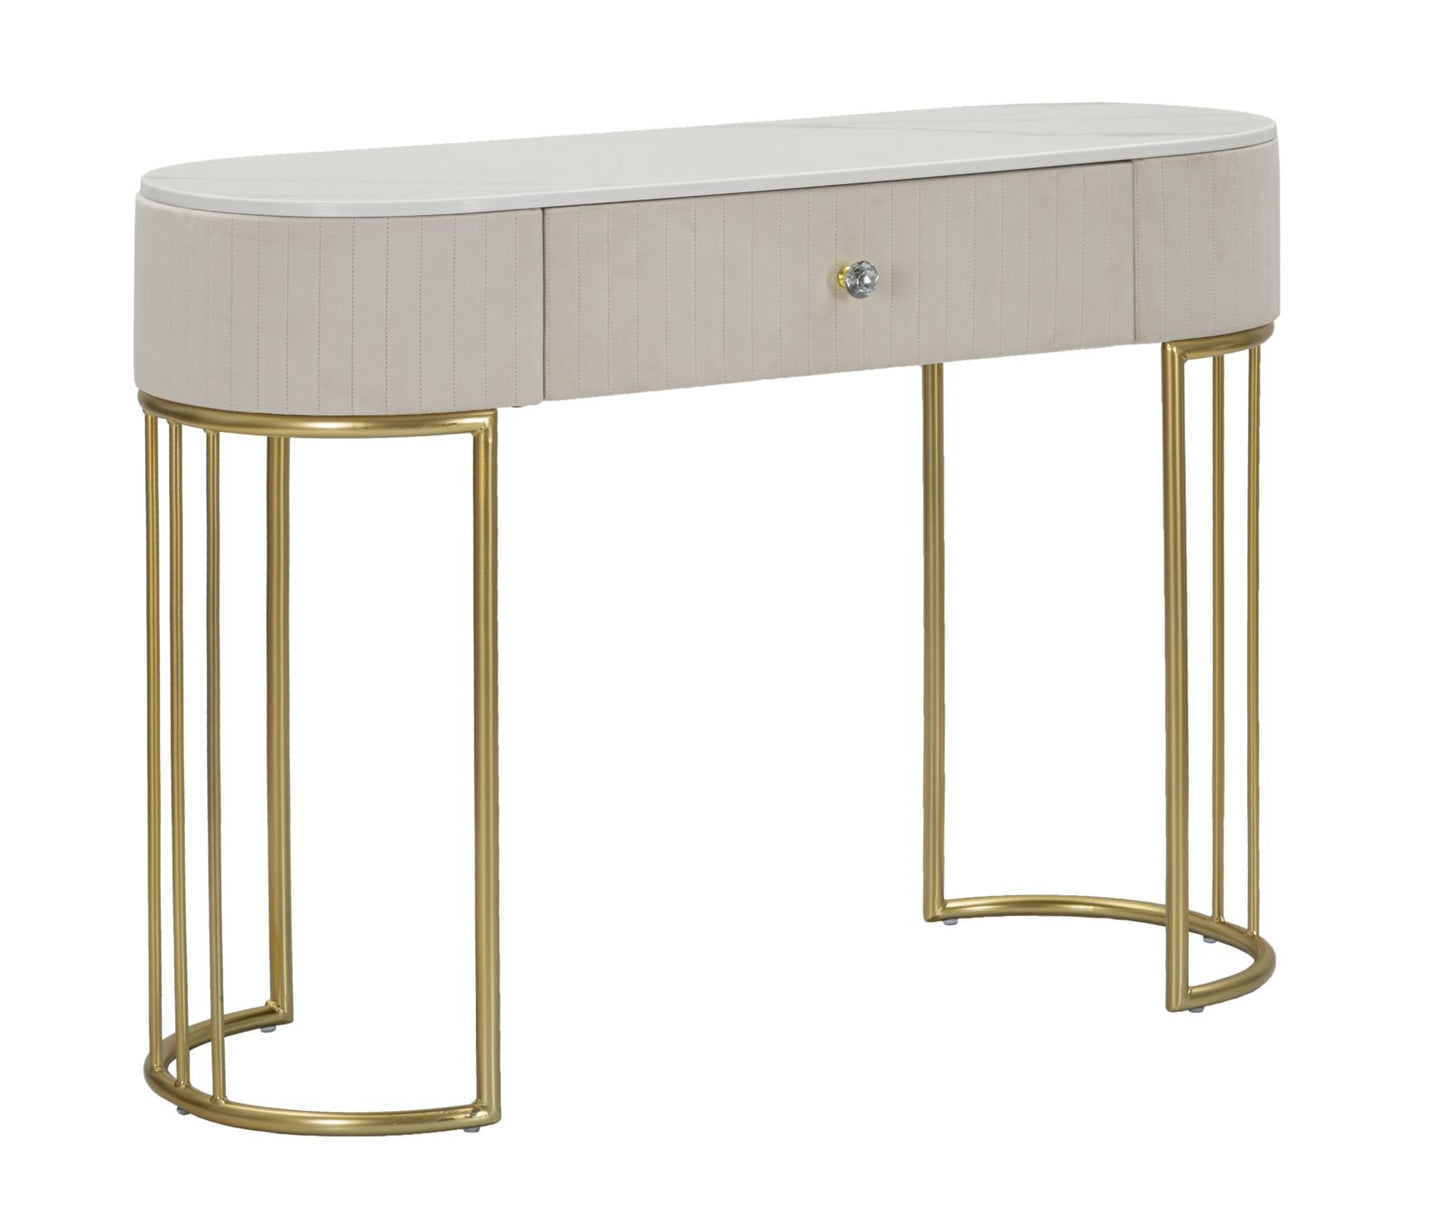 Buy Wood and metal console upholstered with fabric, 1 drawer, Montpellier Cream / Gold, l100xW43xH74 cm online, best price, free delivery